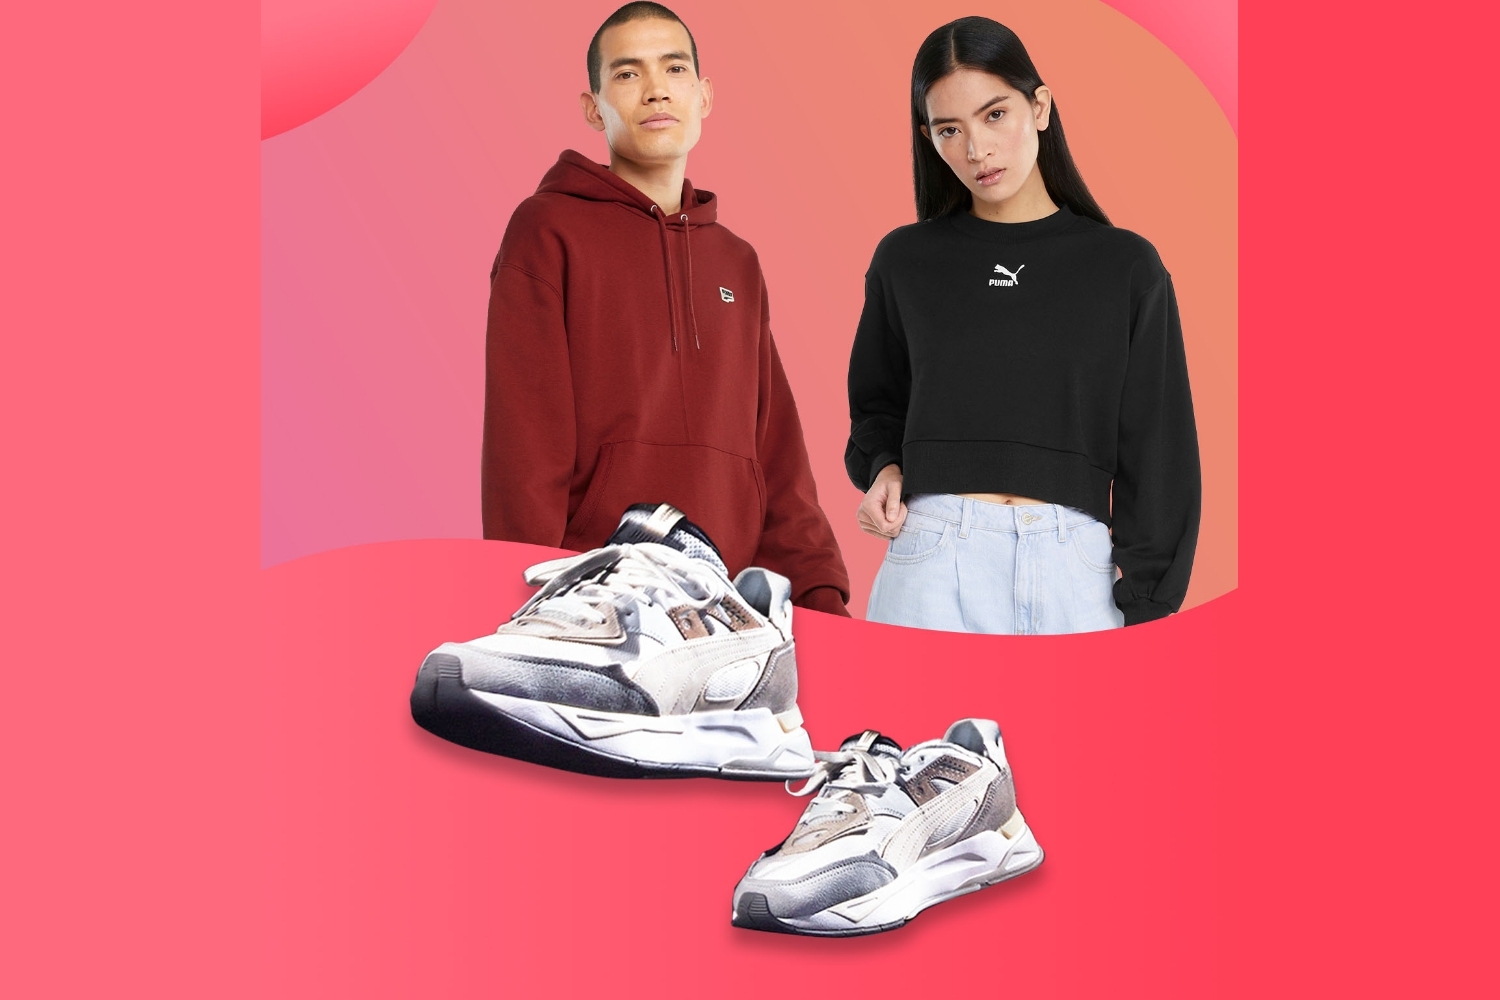 PUMA comes with high discounts during Black Friday